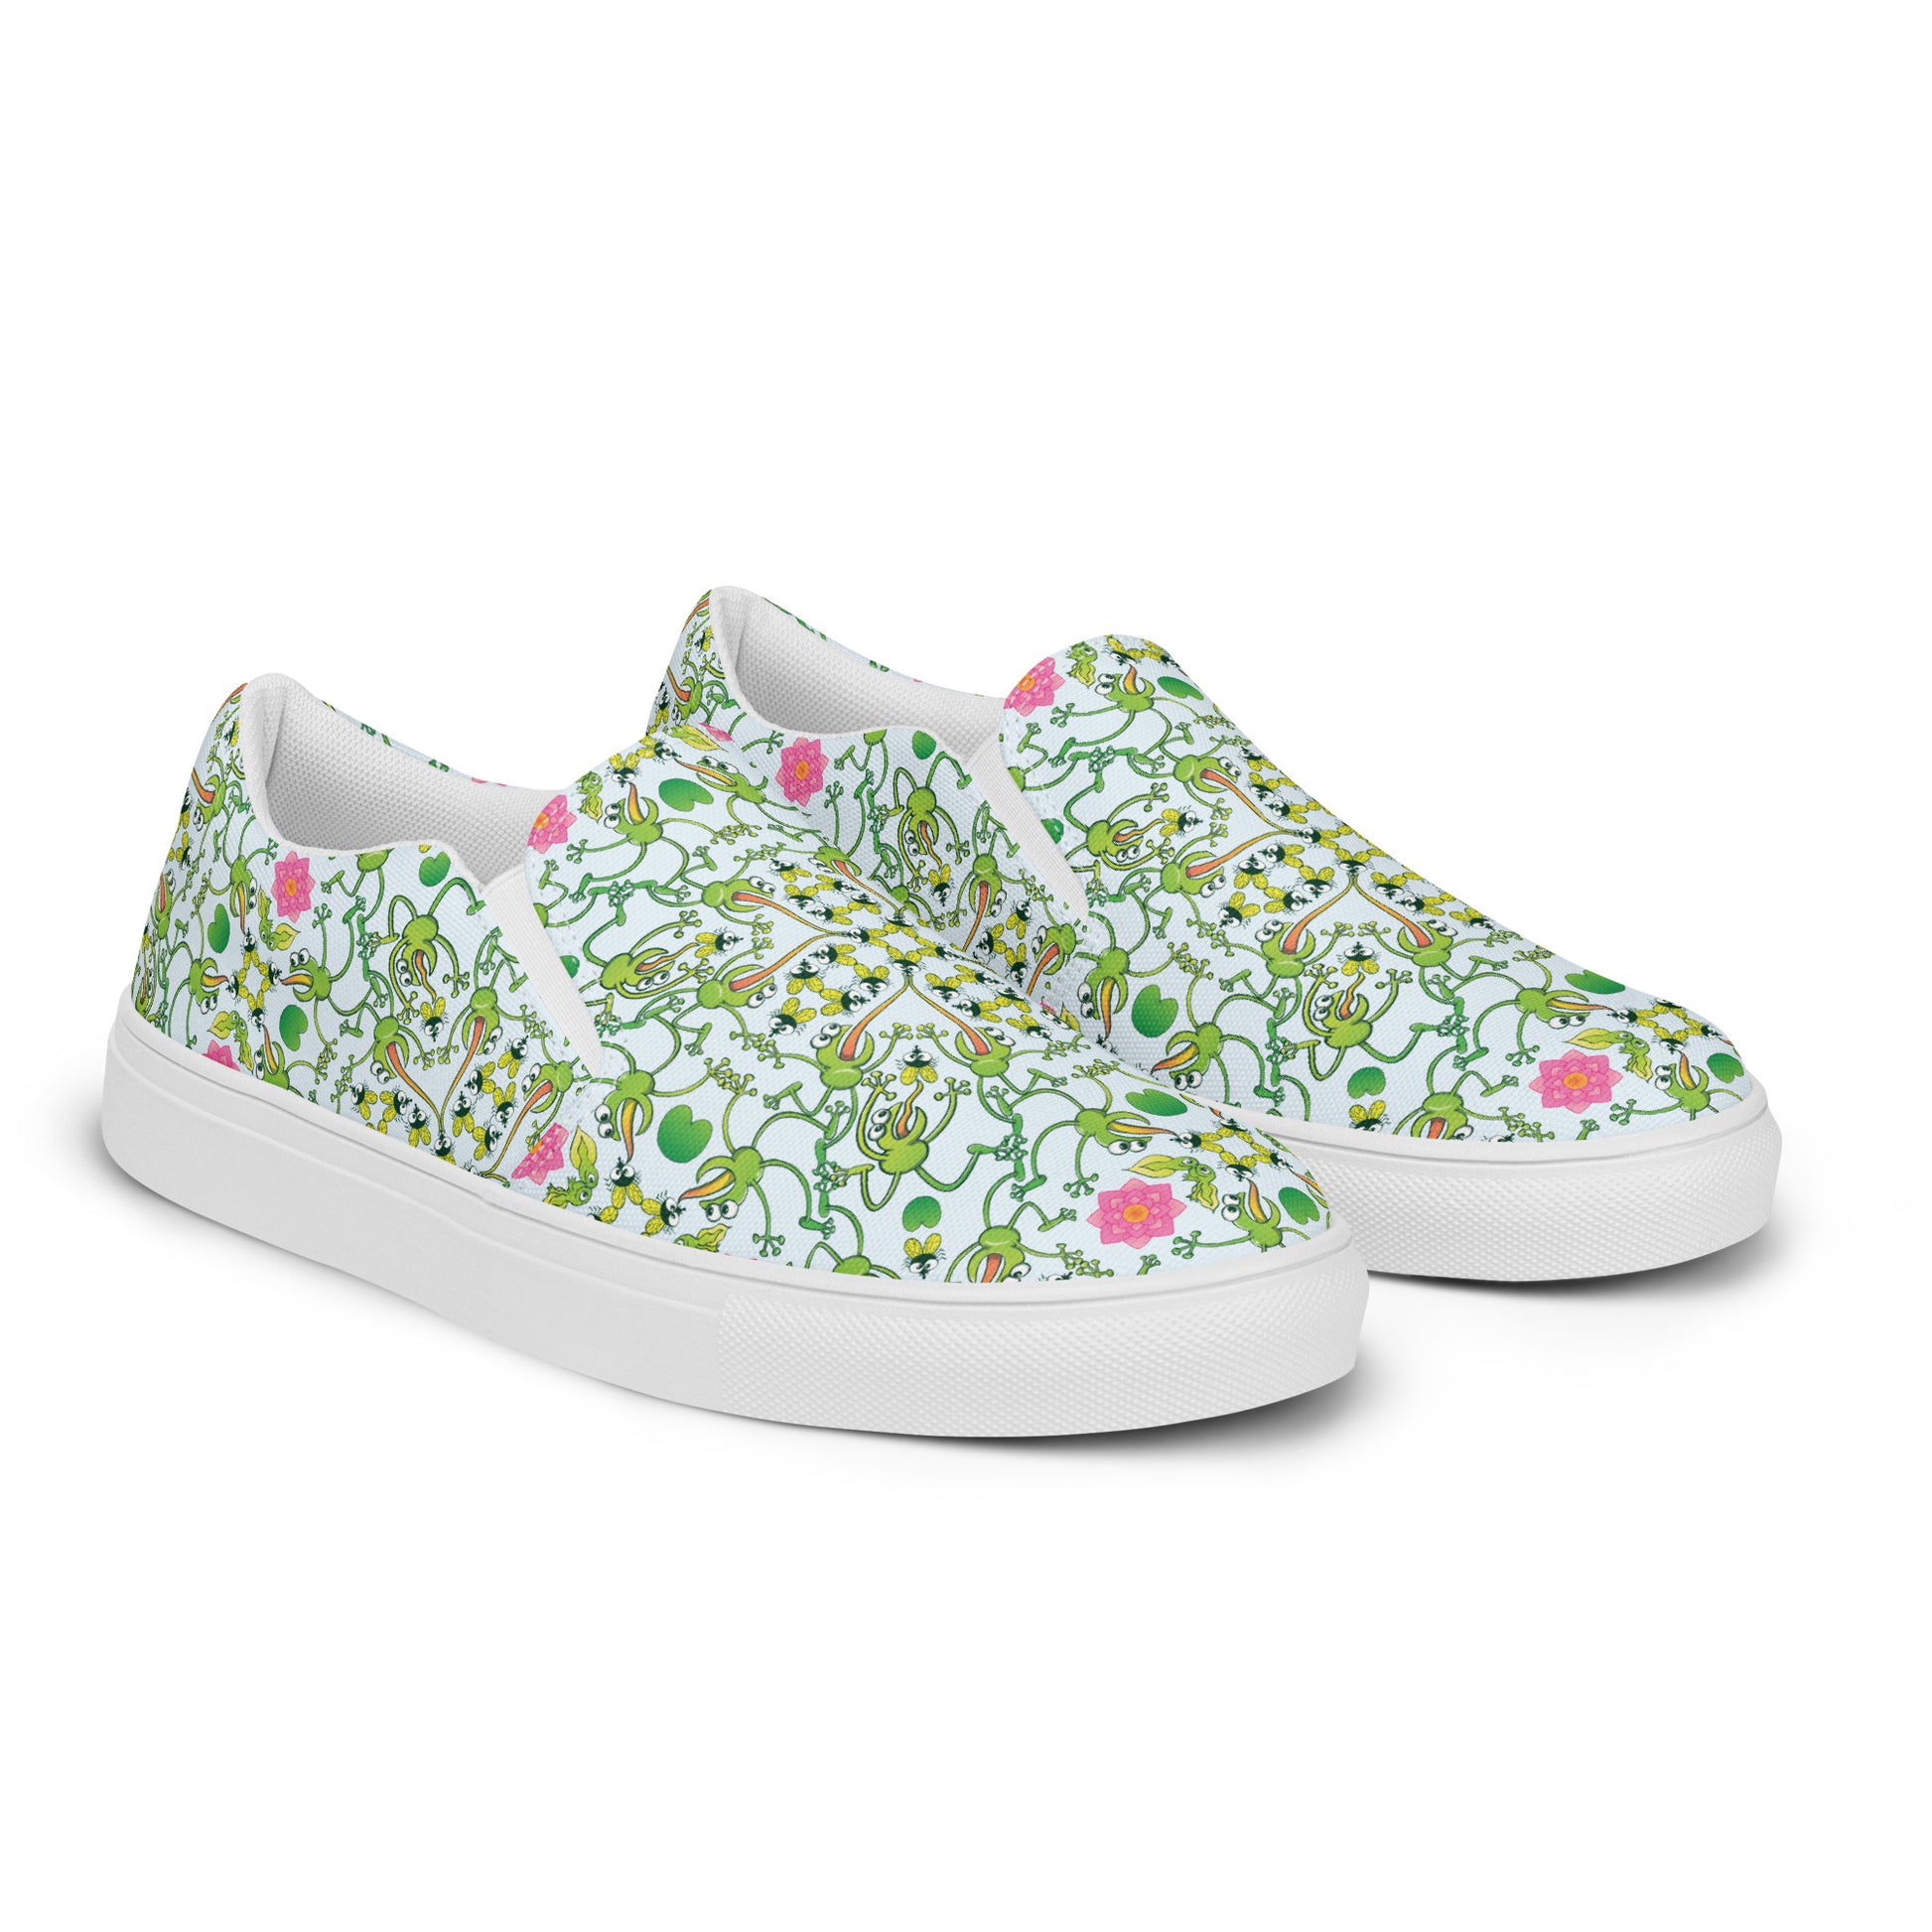 Funny frogs hunting flies Women’s slip-on canvas shoes. Overview